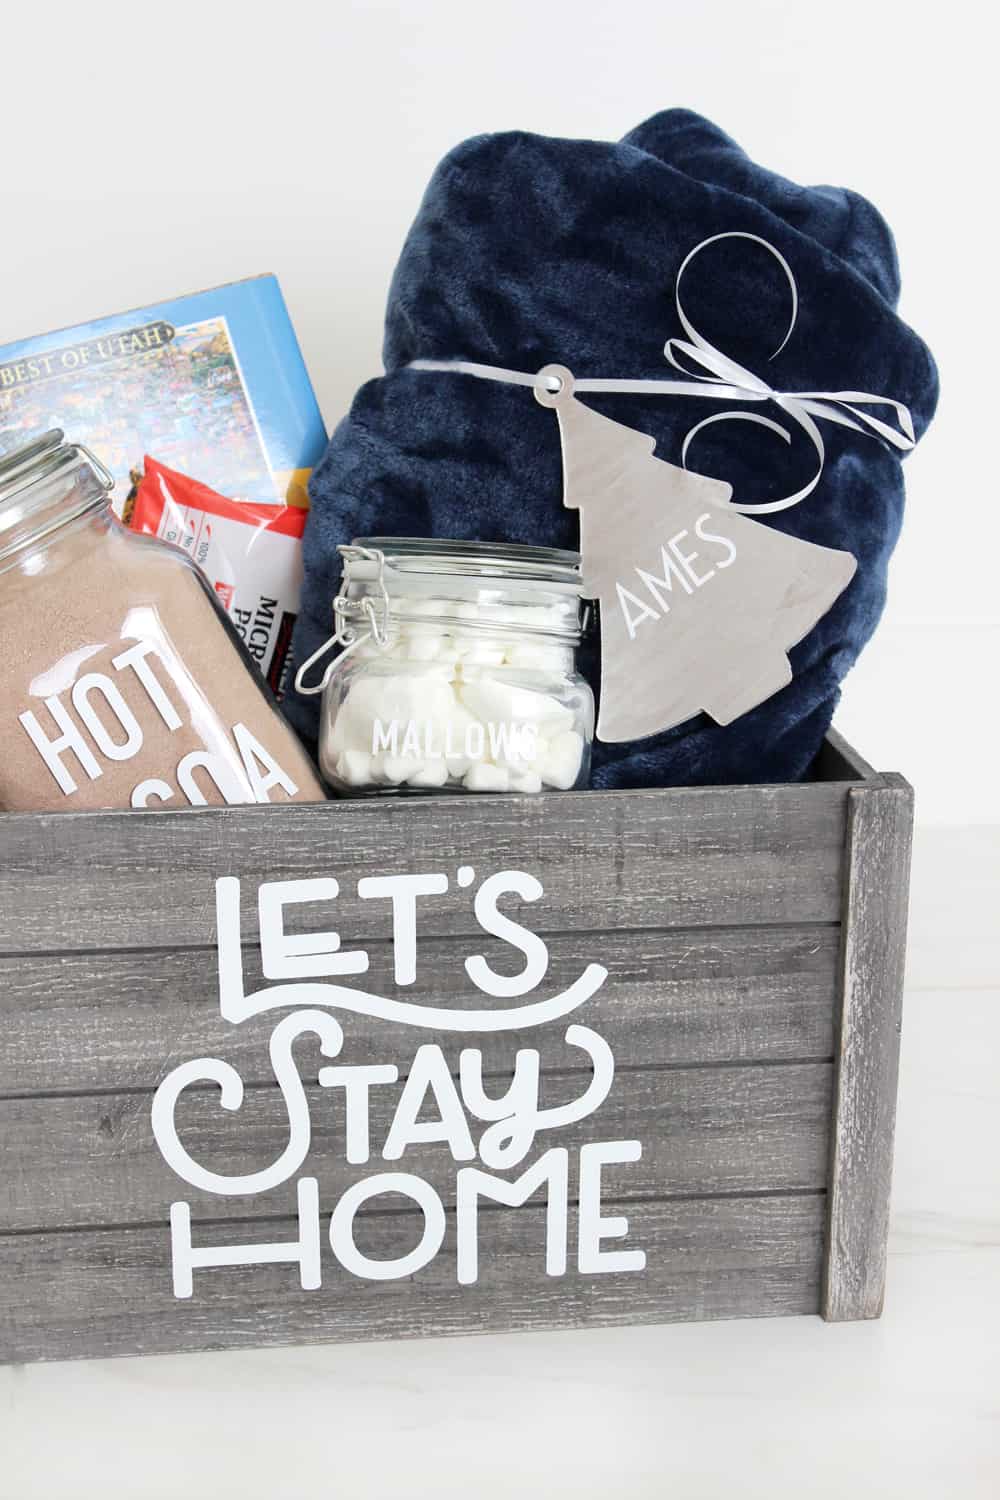 Loving this easy personalized "night in" gift basket idea! Easy to put together but can be used again and again! Perfect gift for close friends. 